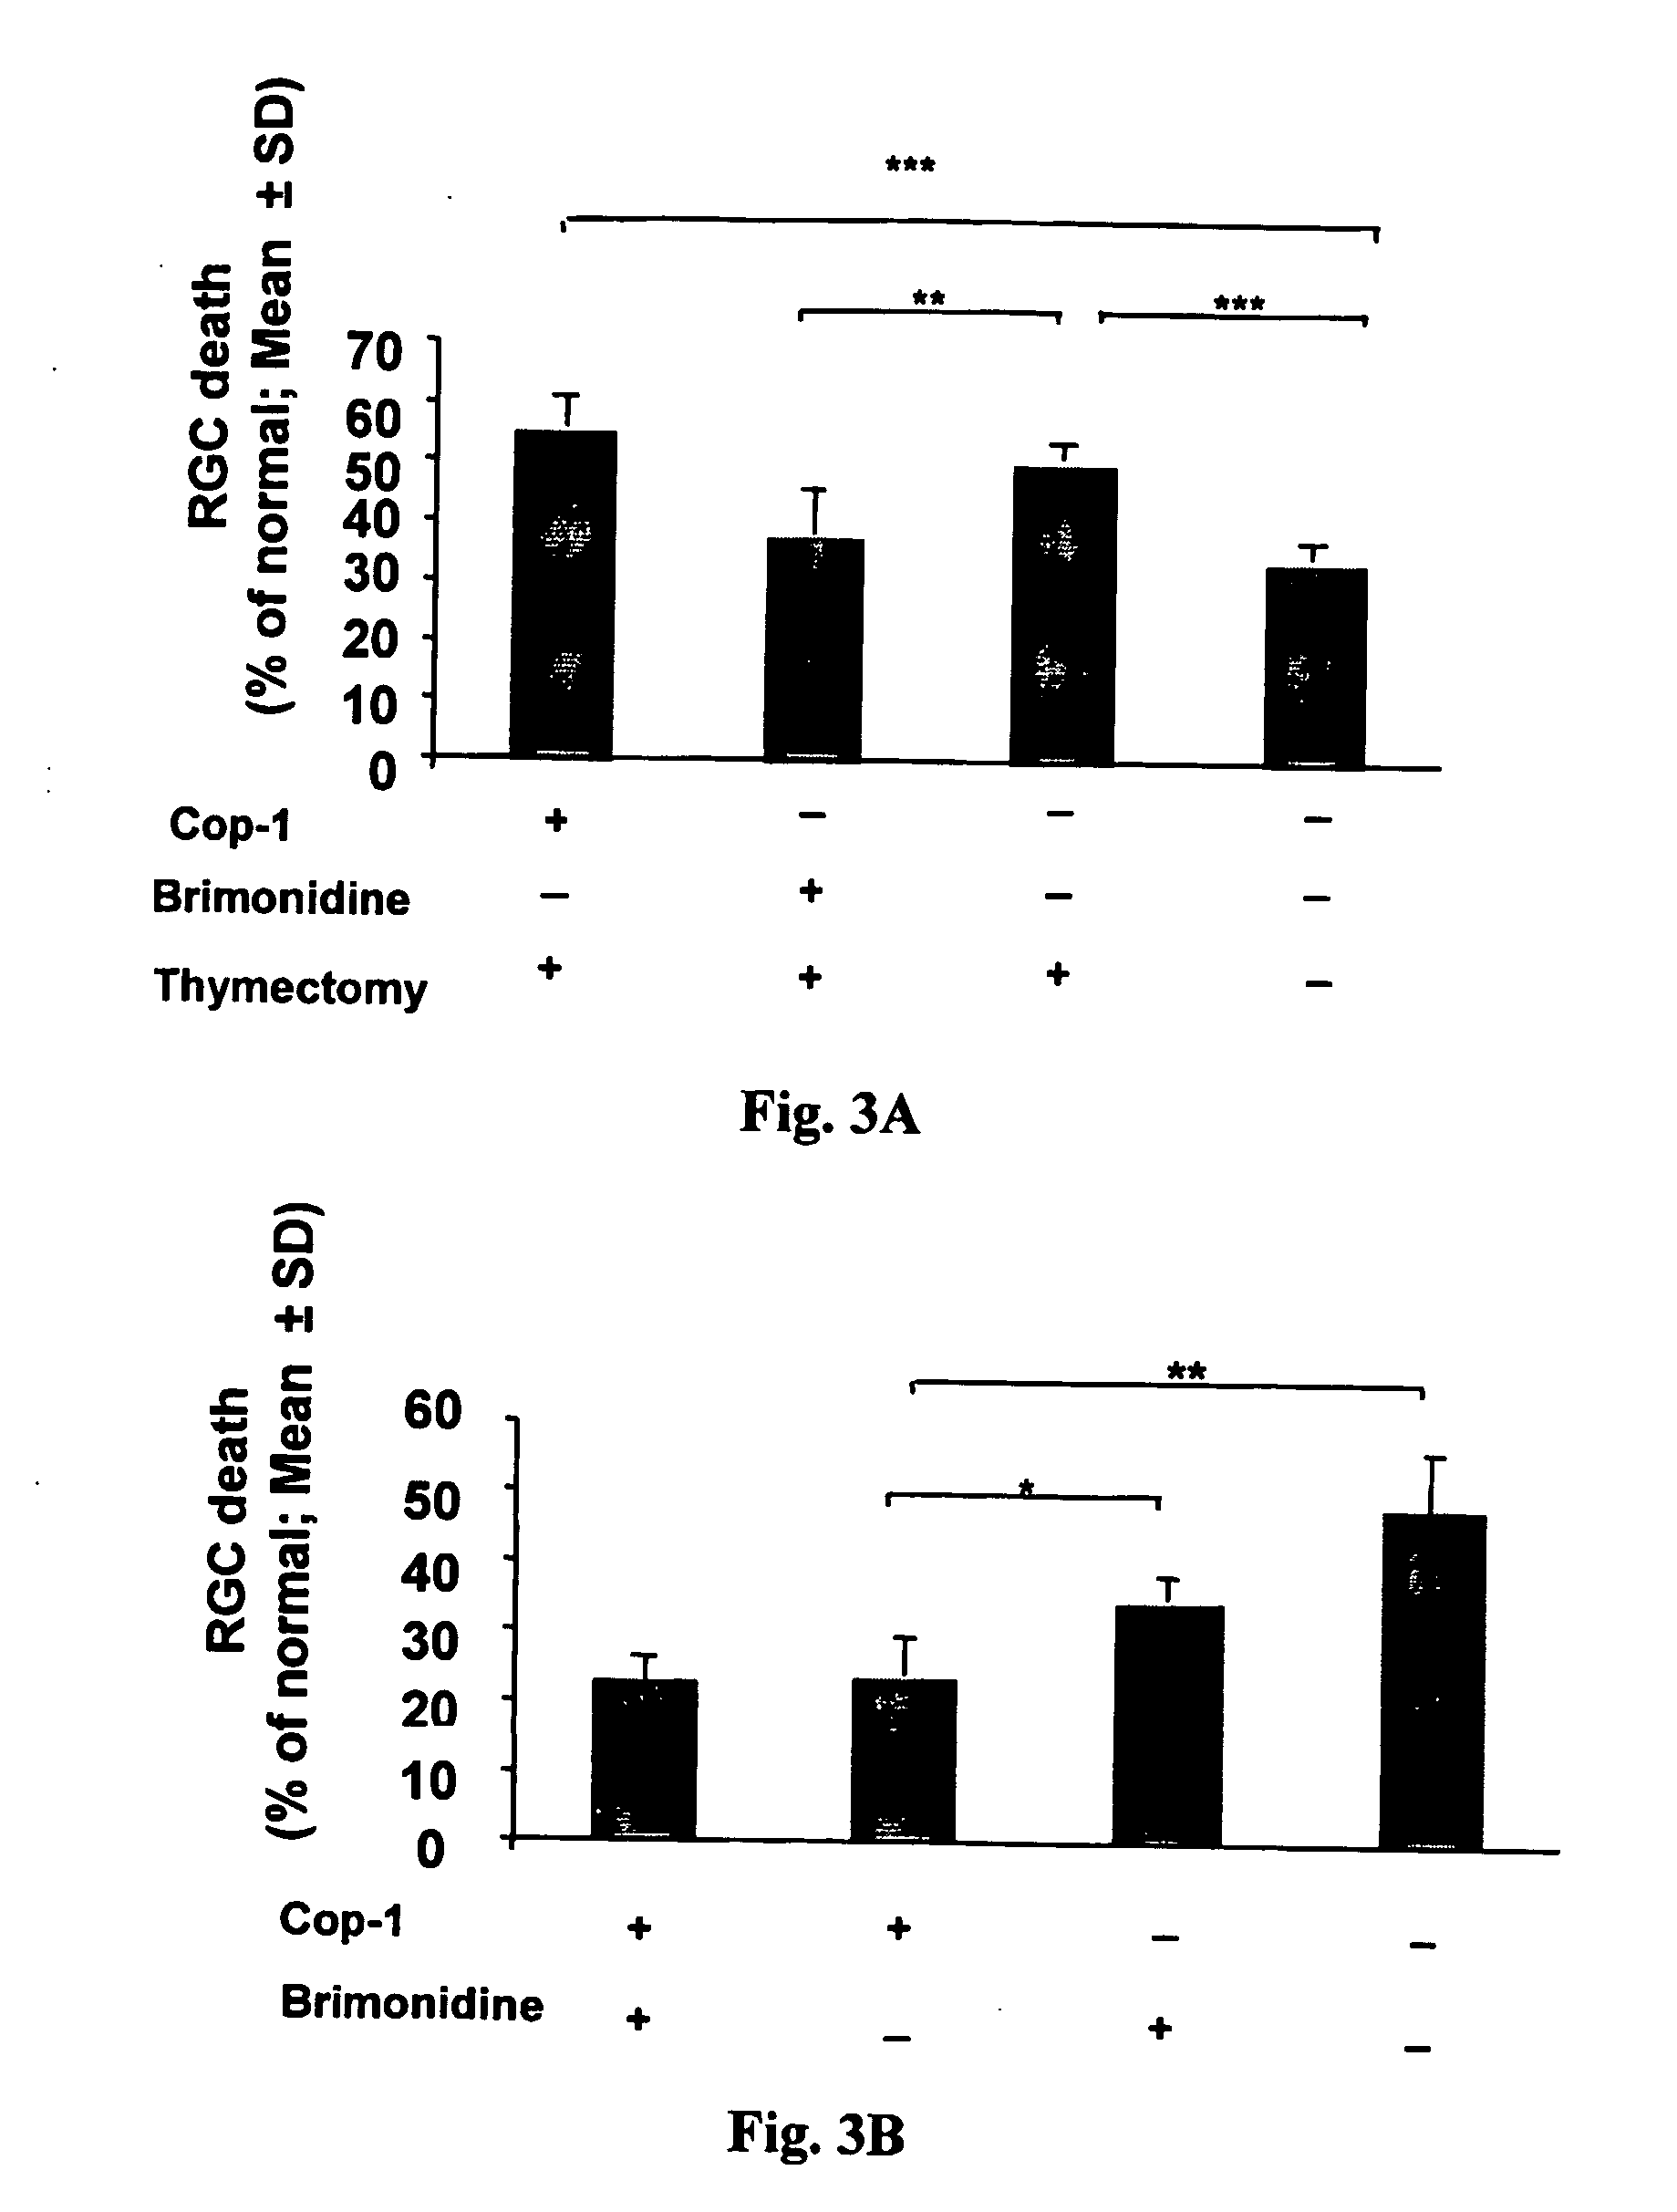 Eye-Drop Vaccine Containing Copolymer 1 for Therapeutic Immunization